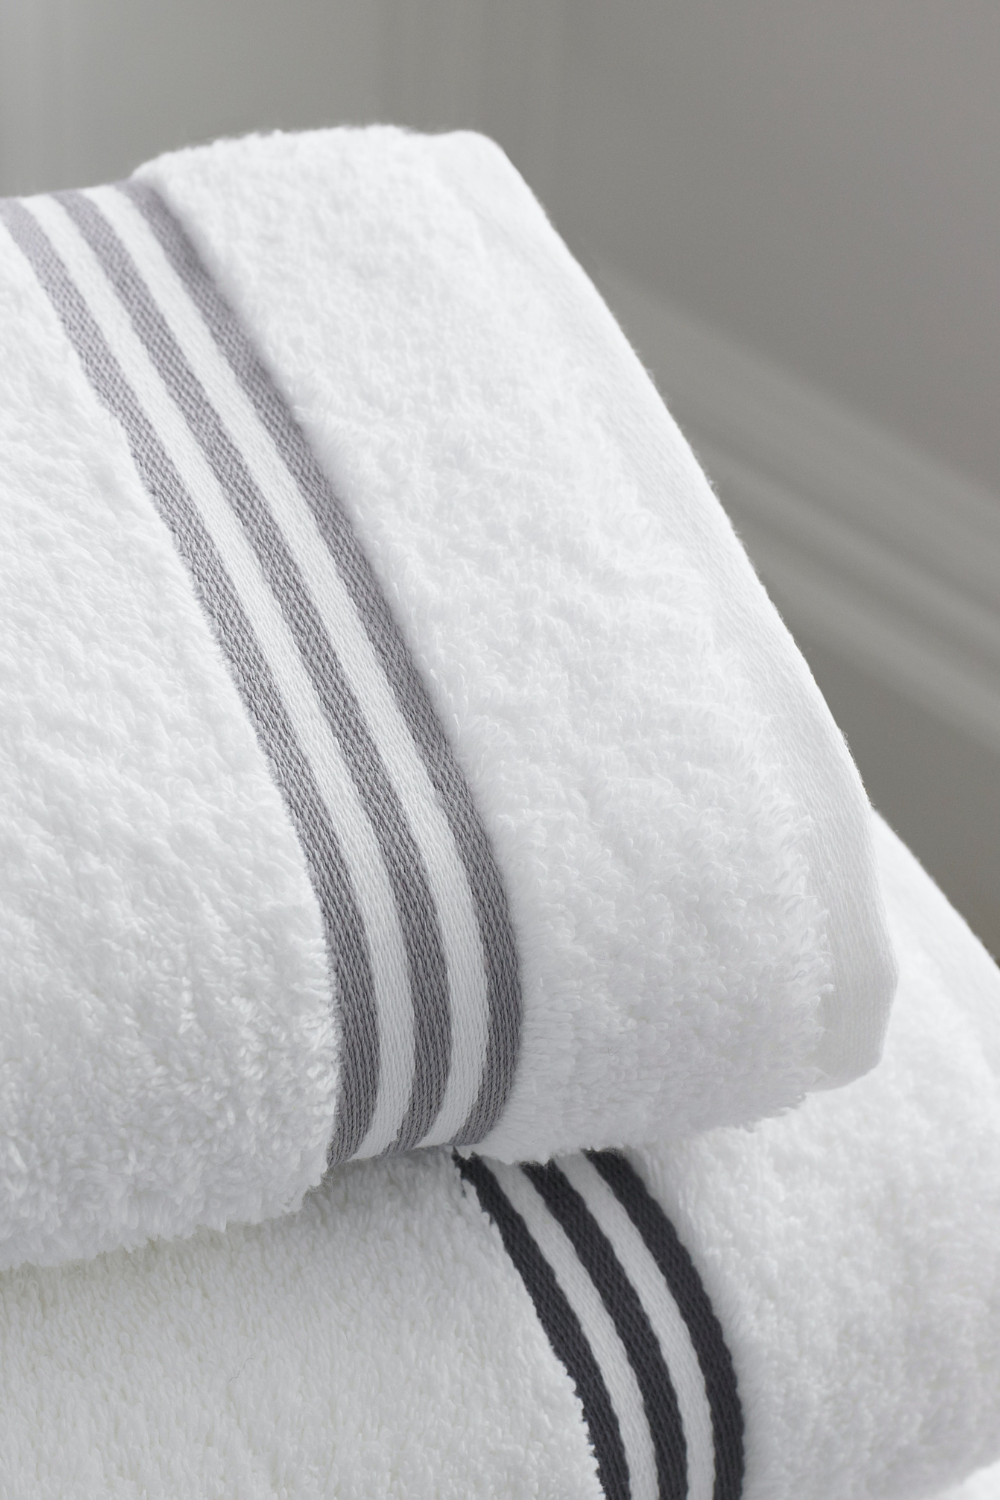 Budget-Friendly Winter Spa Experience: Nontoxic Air + Fabric Freshener Guide for Towels and Bathrobes